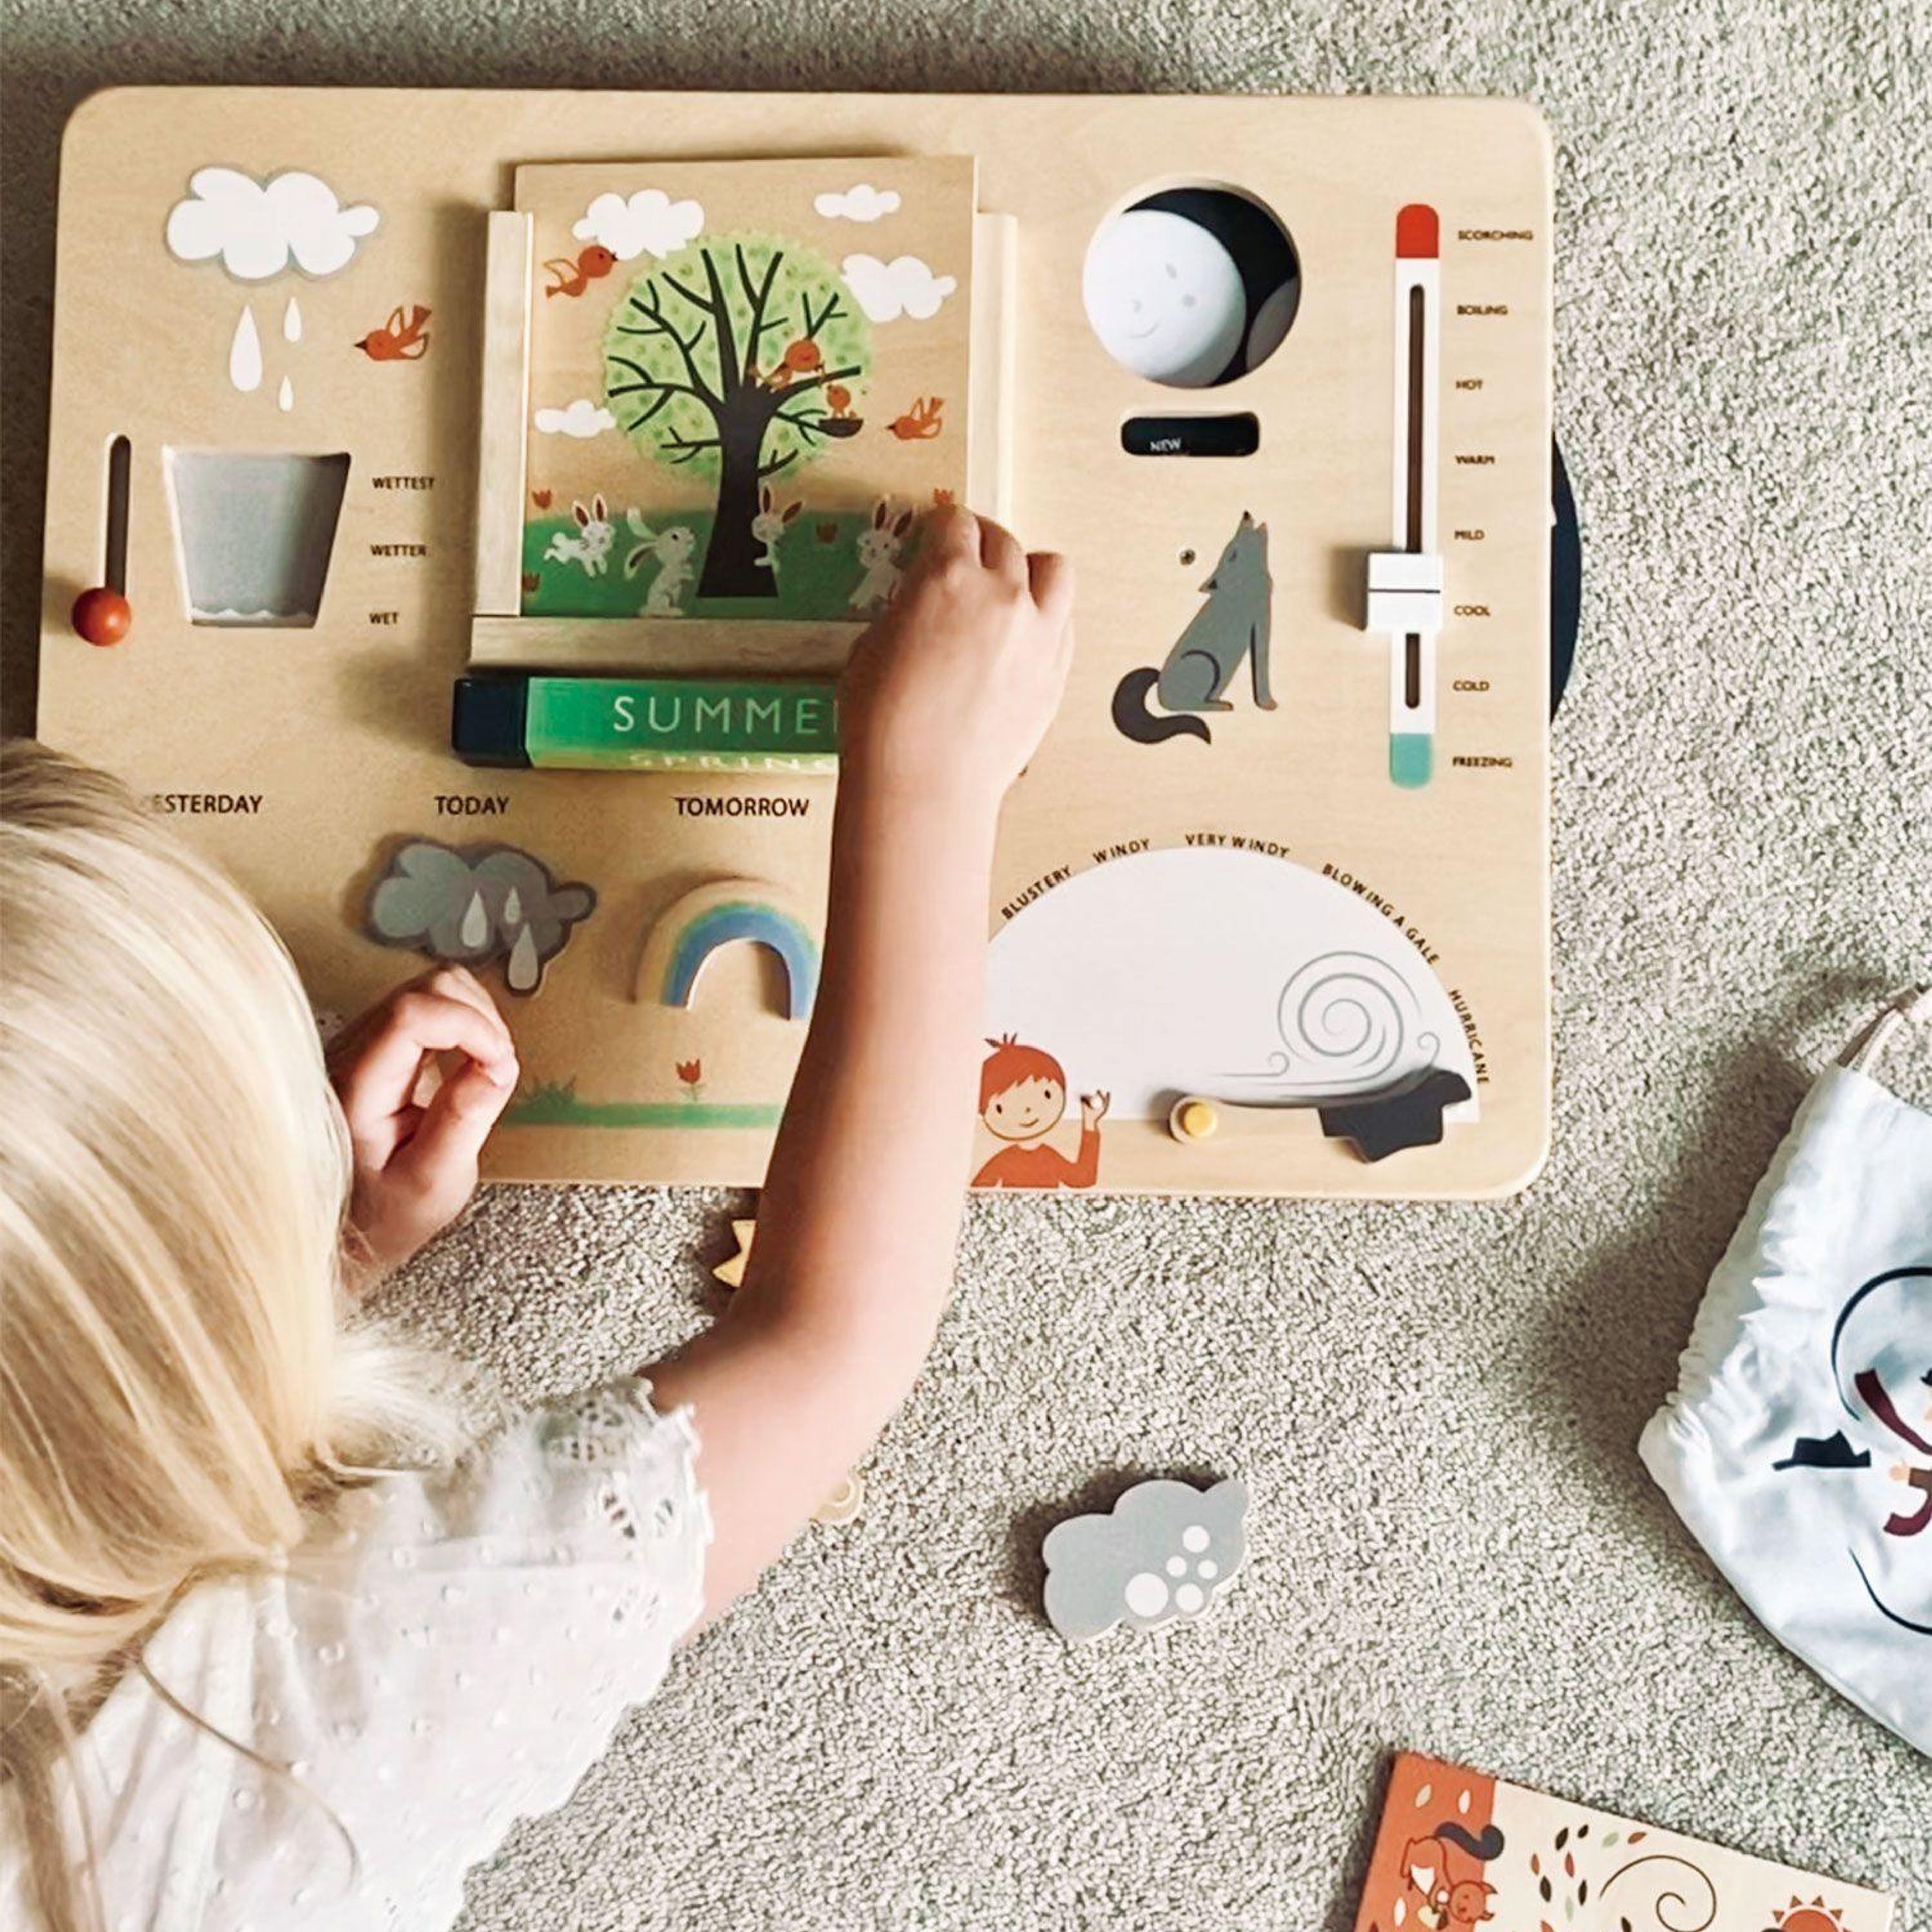 Tender Leaf Toys Daily Weather & Moon Board